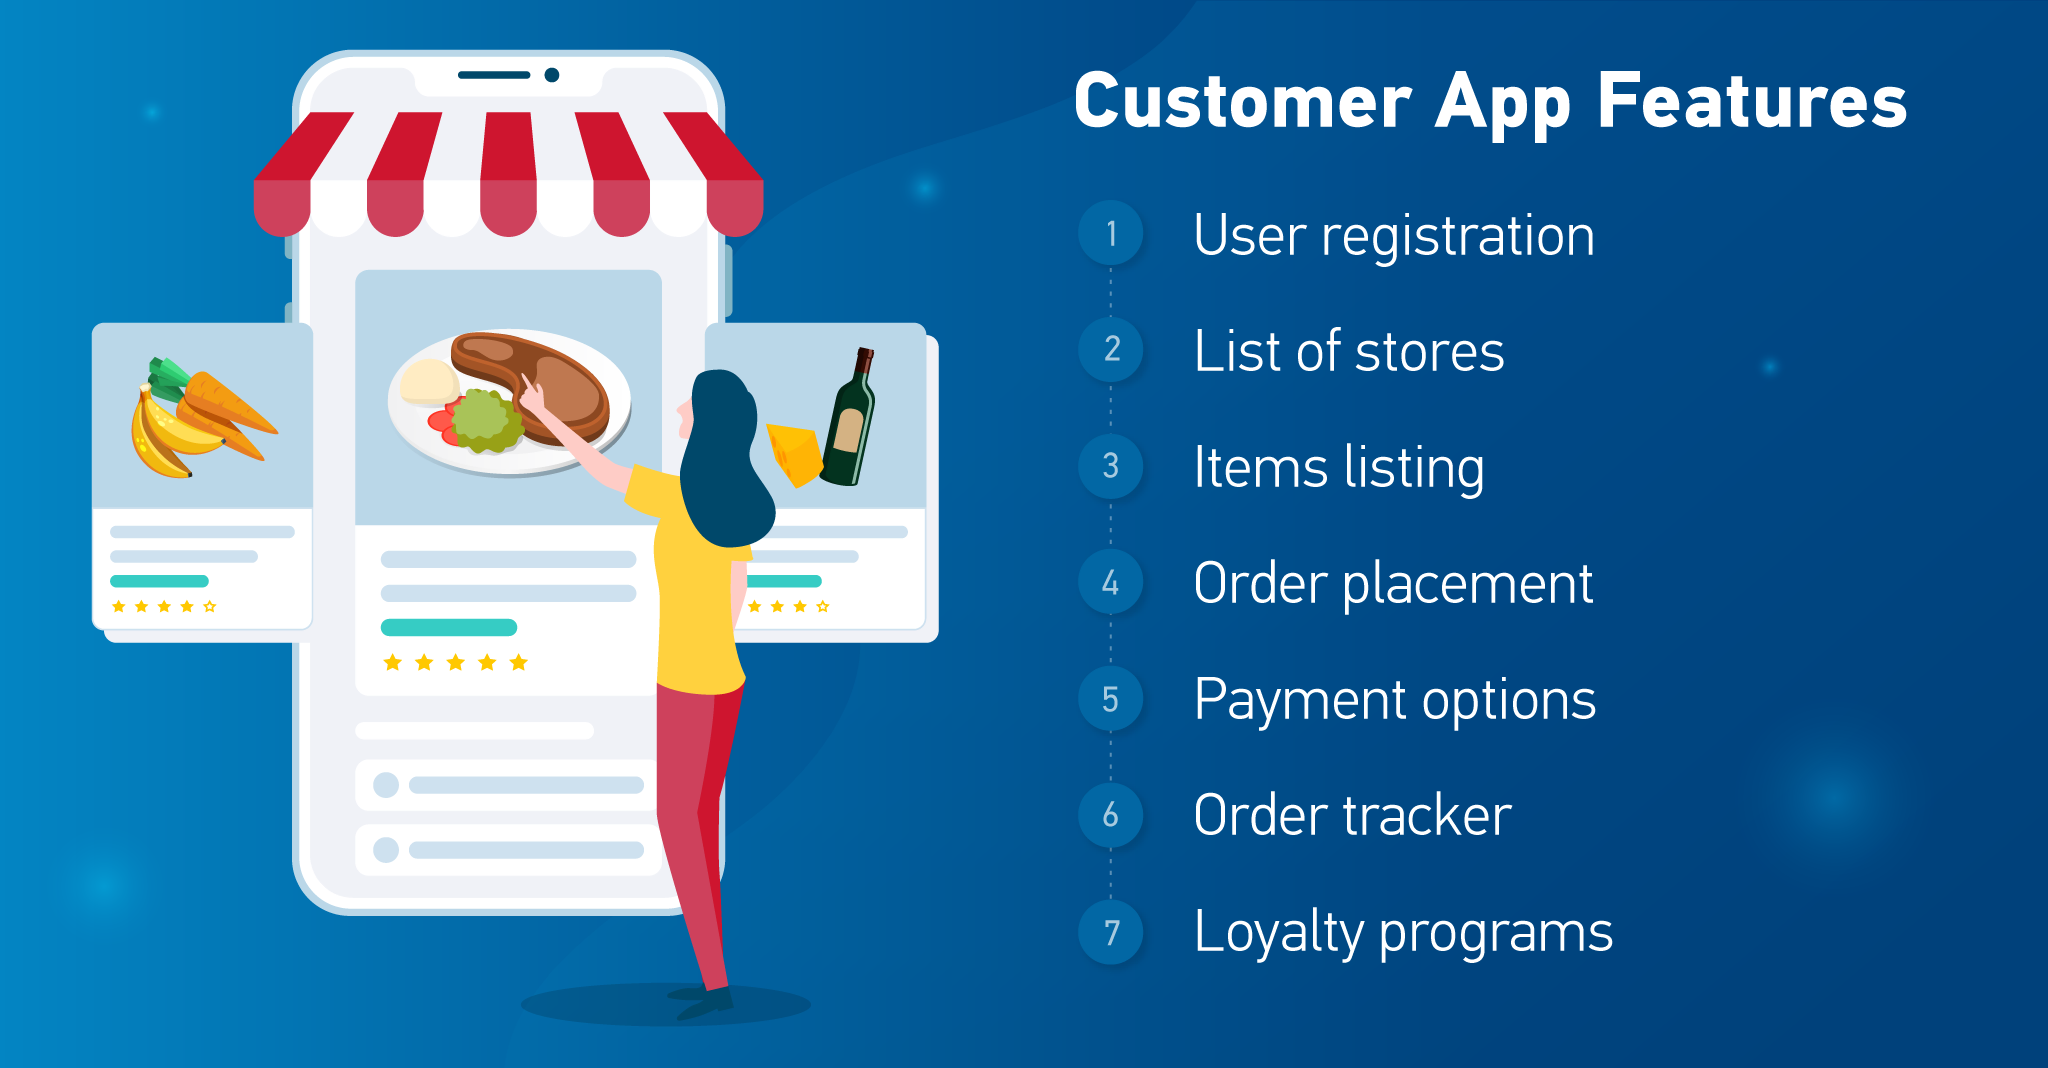 Customer app features for grocery delivery